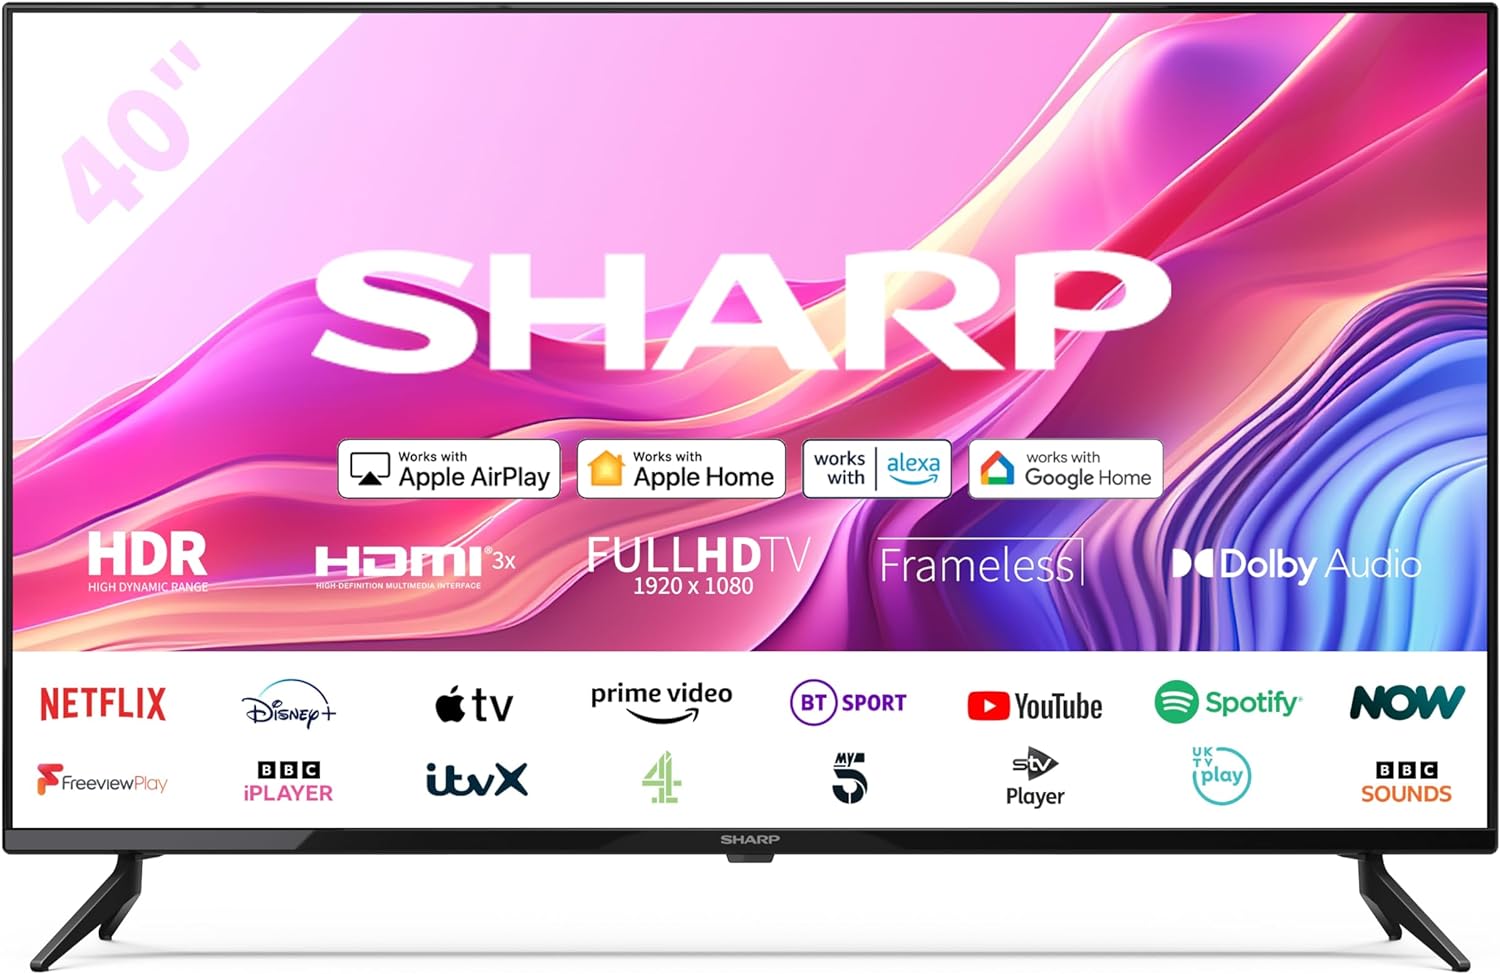 SHARP 55FJ6K 55 - Inch 4K UHD Smart Roku Frameless LED TV in Black with Active Motion 400, Dobly Vision, HDR10 + HLG Support, Freeview Play, Pre - Installed Apps, 3x HDMI & 2x USB - Amazing Gadgets Outlet